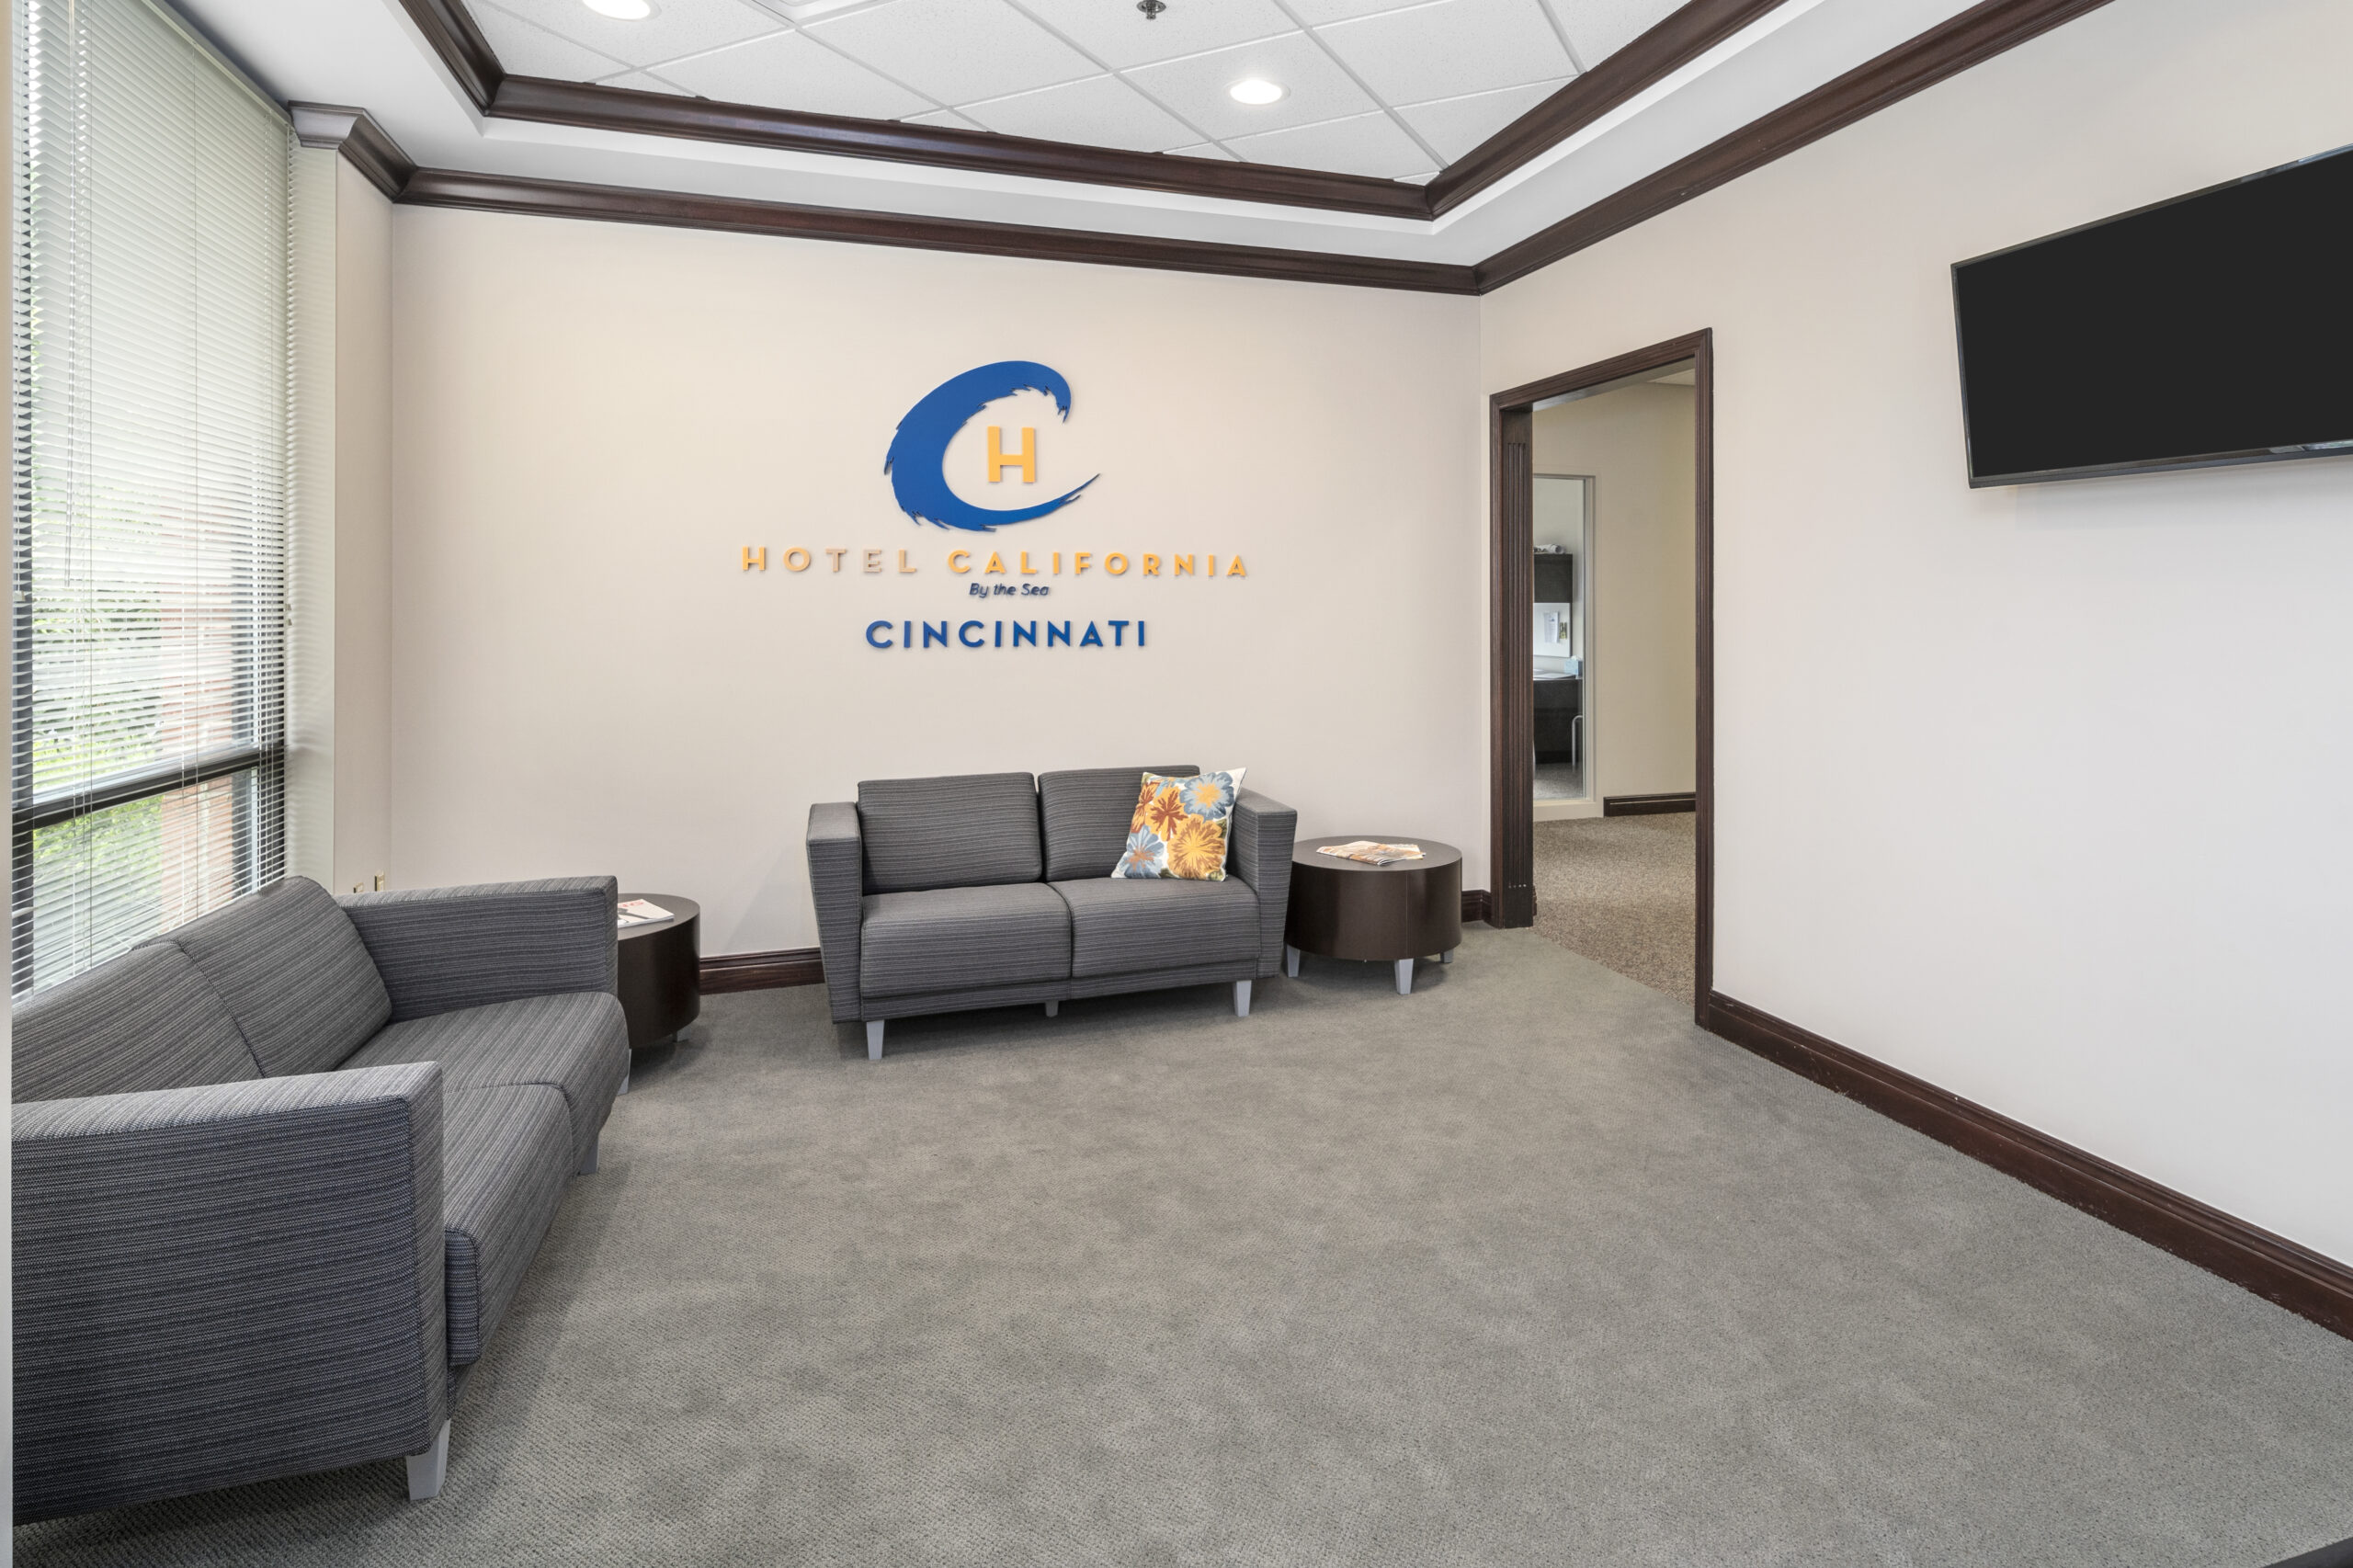 Lobby with gray couches at outpatient rehab Cincinnati Ohio 